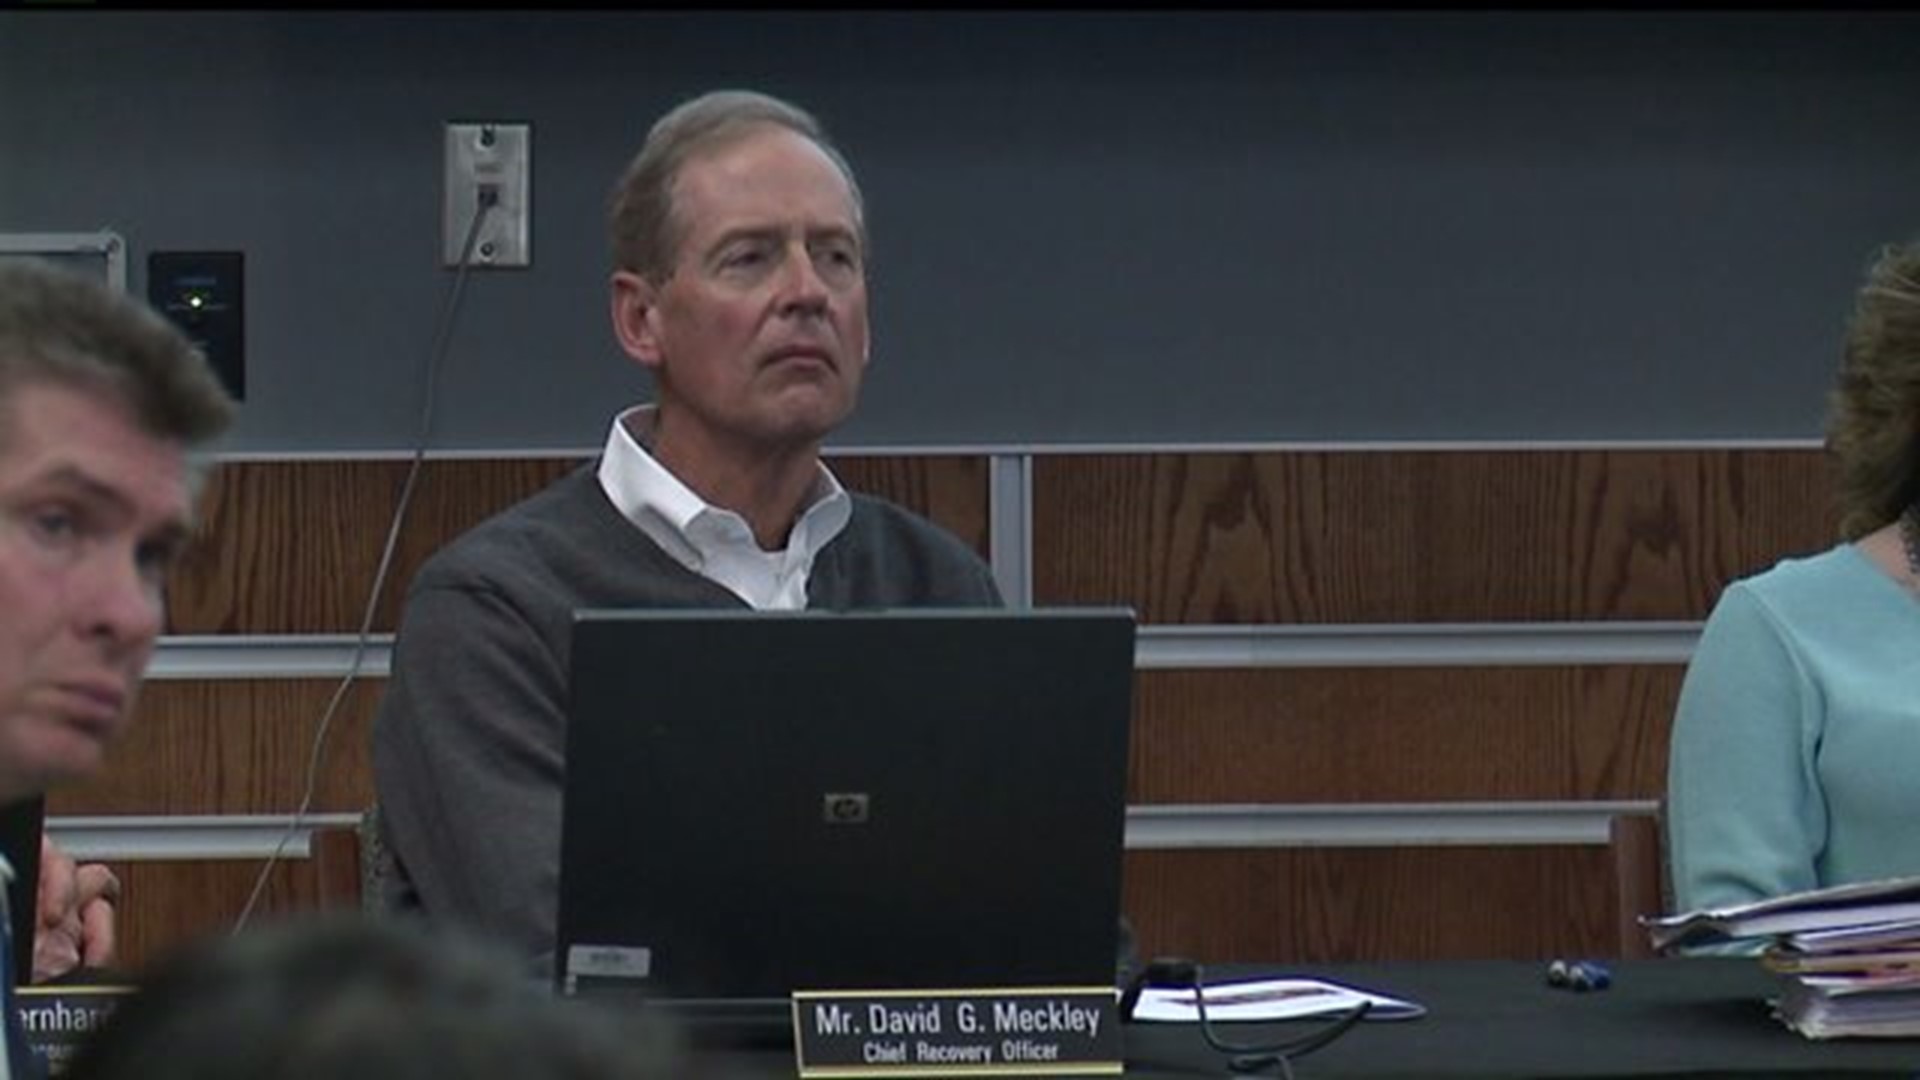 York City Schools` Chief Recovery Officer David Meckley Resigns